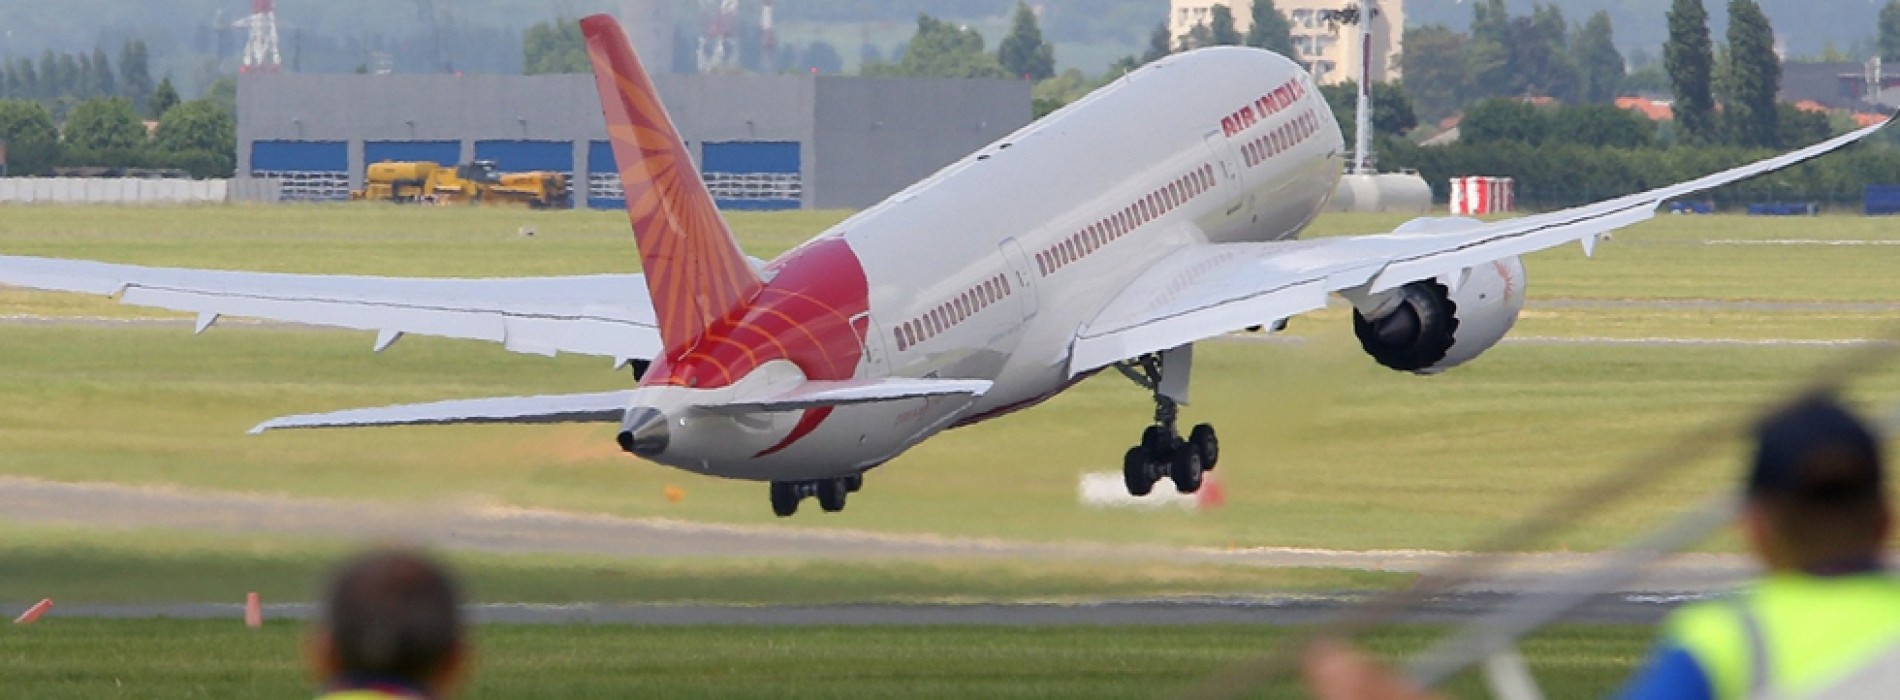 49% FDI in aviation: The political privatisation of Air India is underway